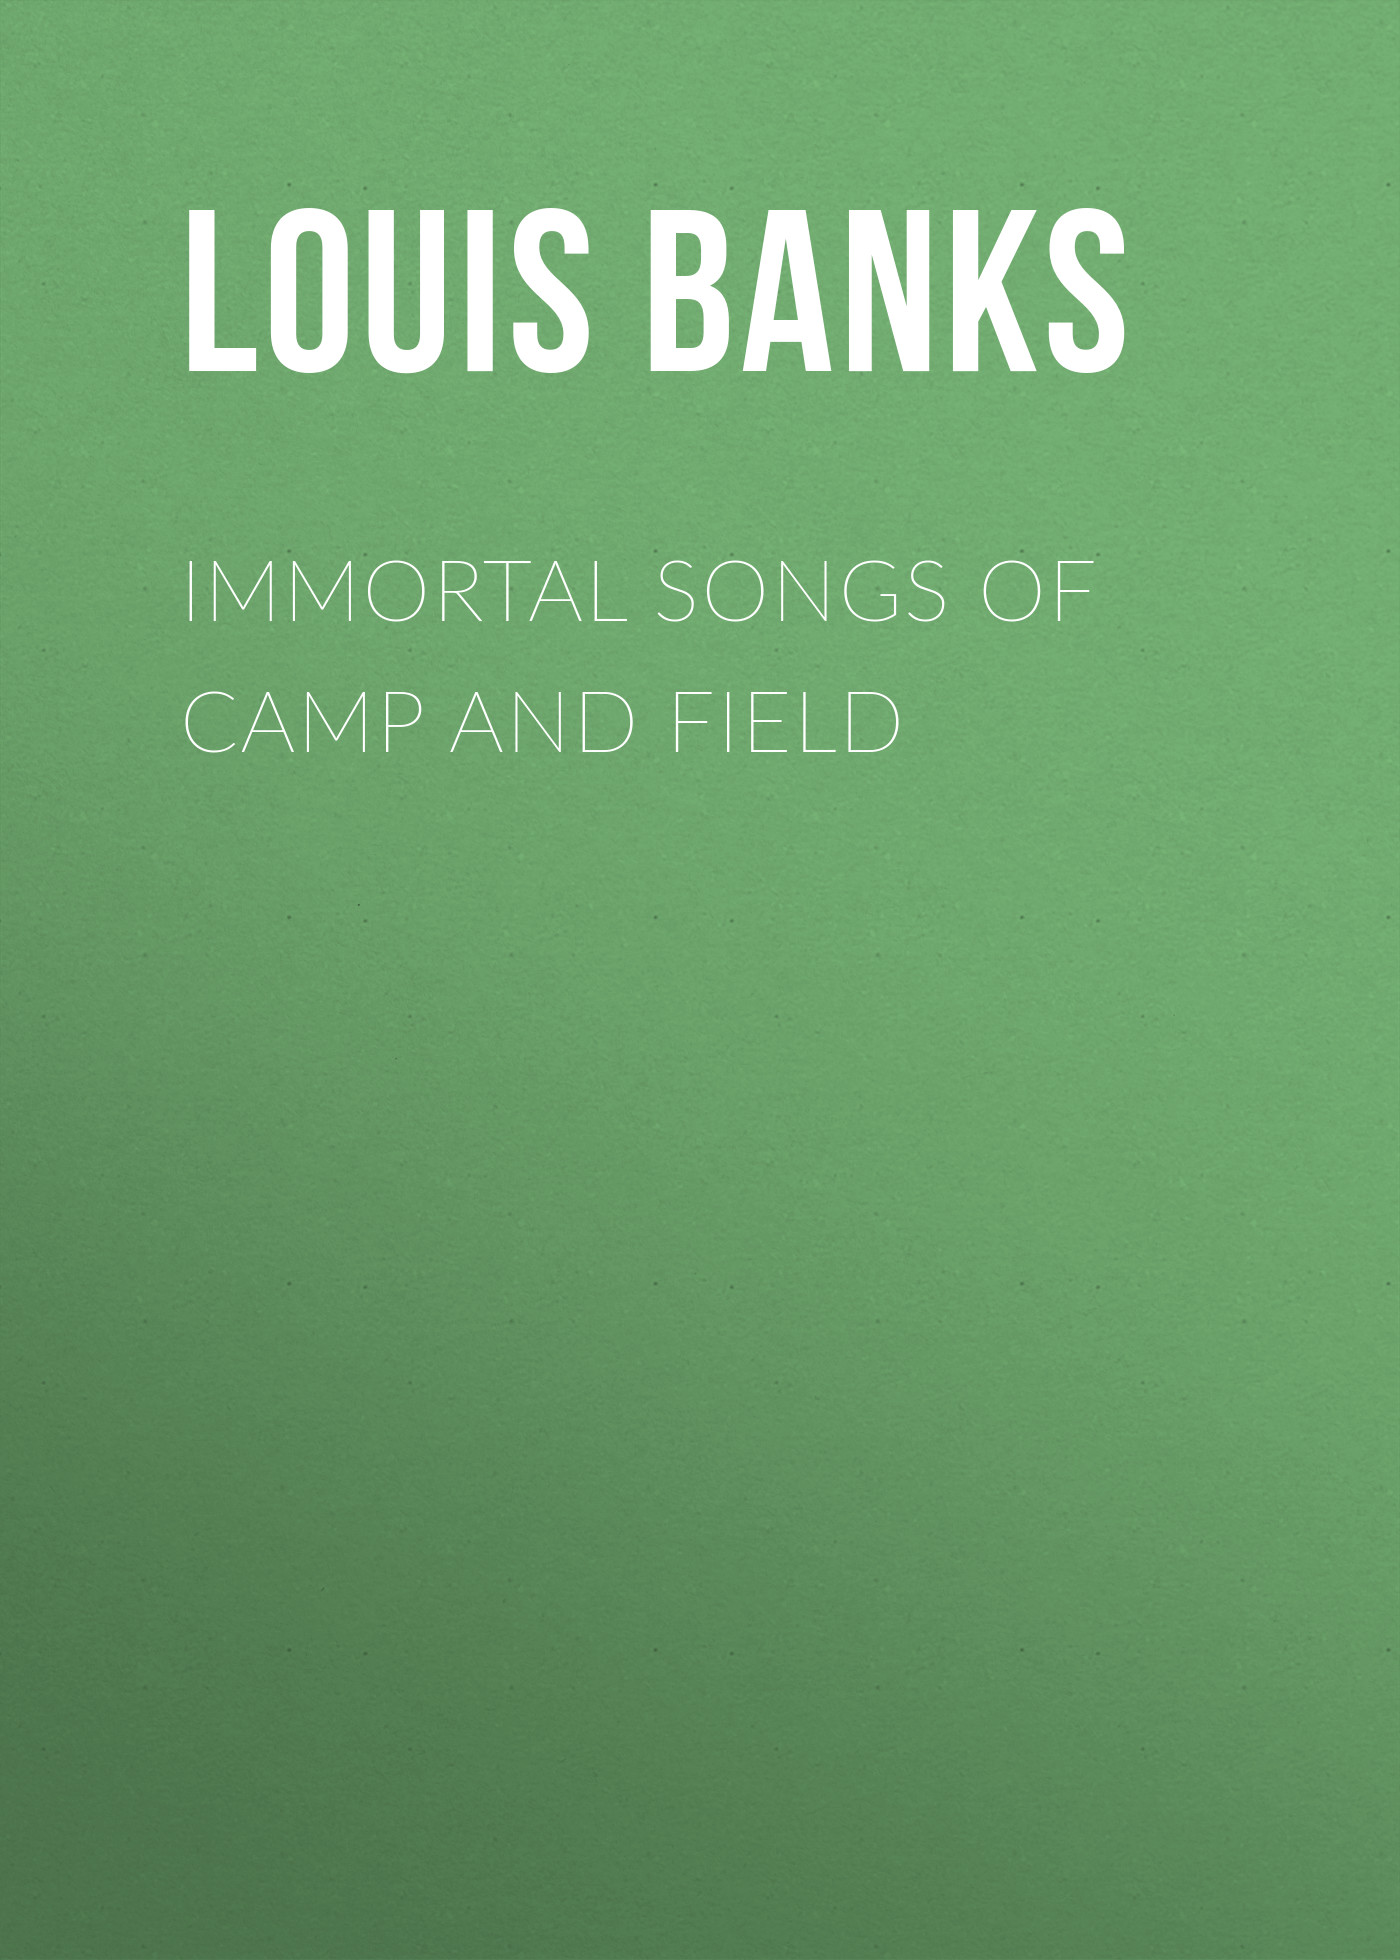 Immortal Songs of Camp and Field